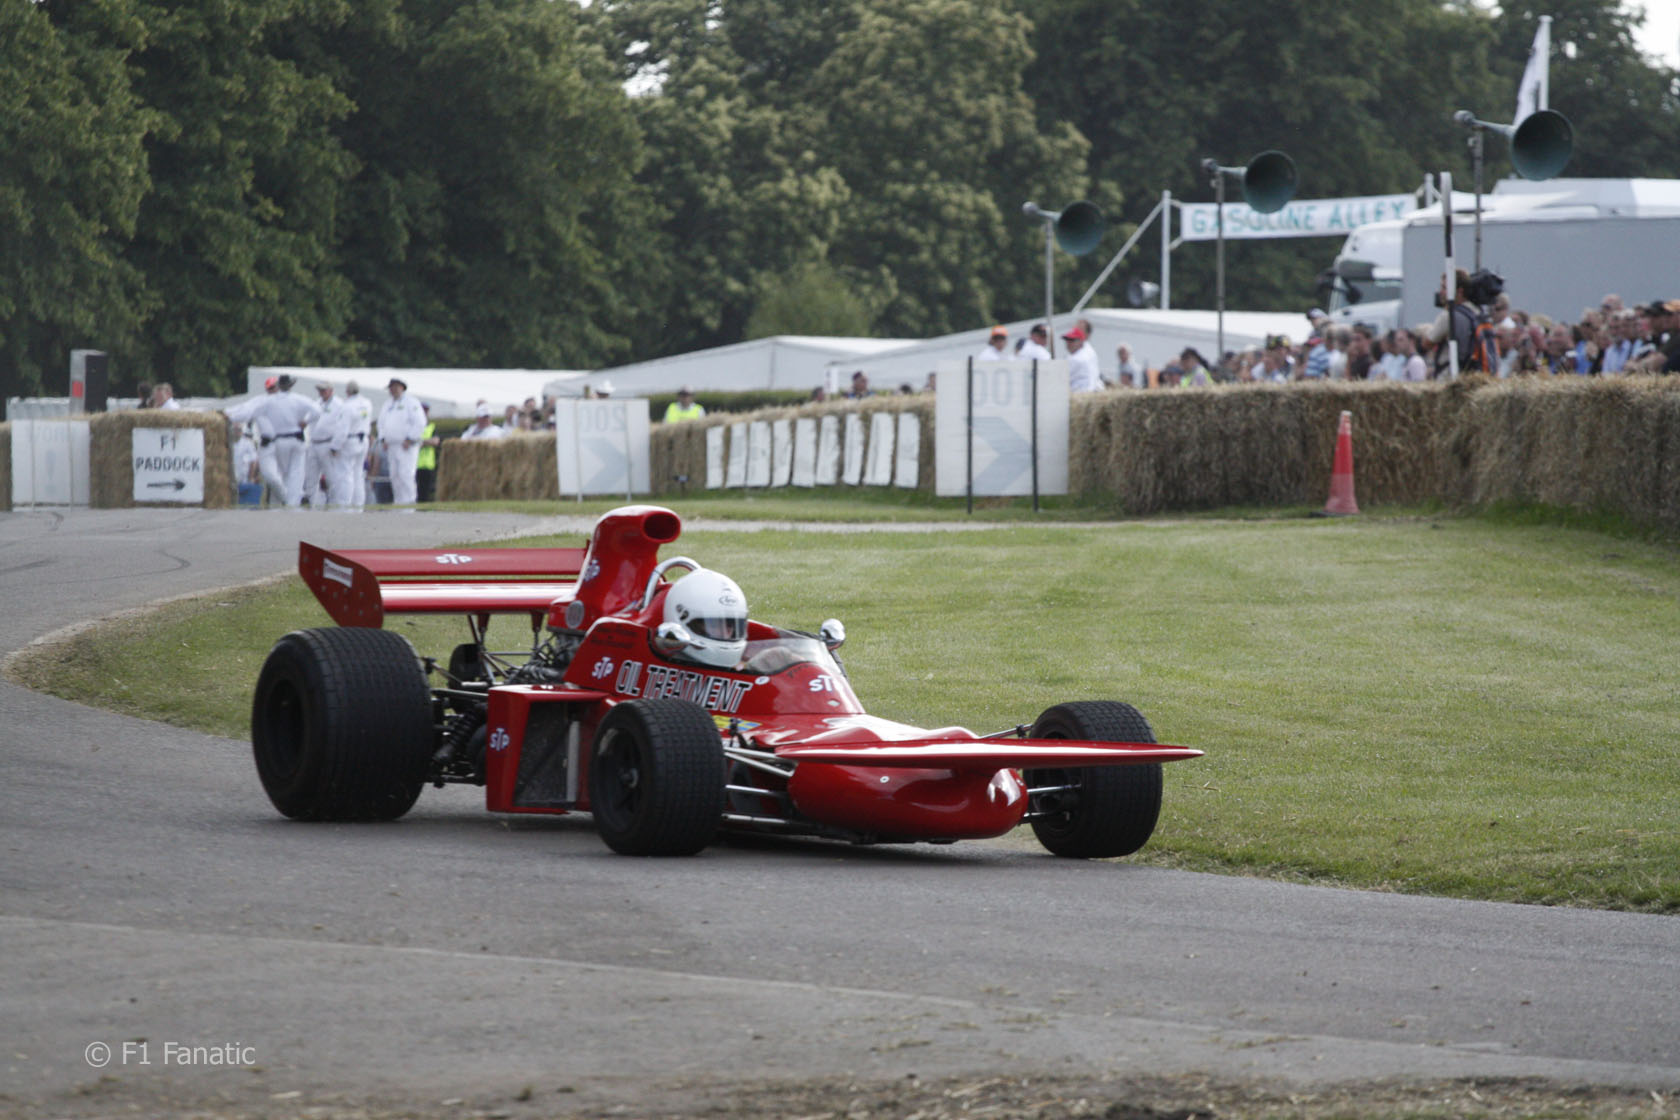 March 711, Goodwood Festival of Speed, 2011 - F1 Fanatic